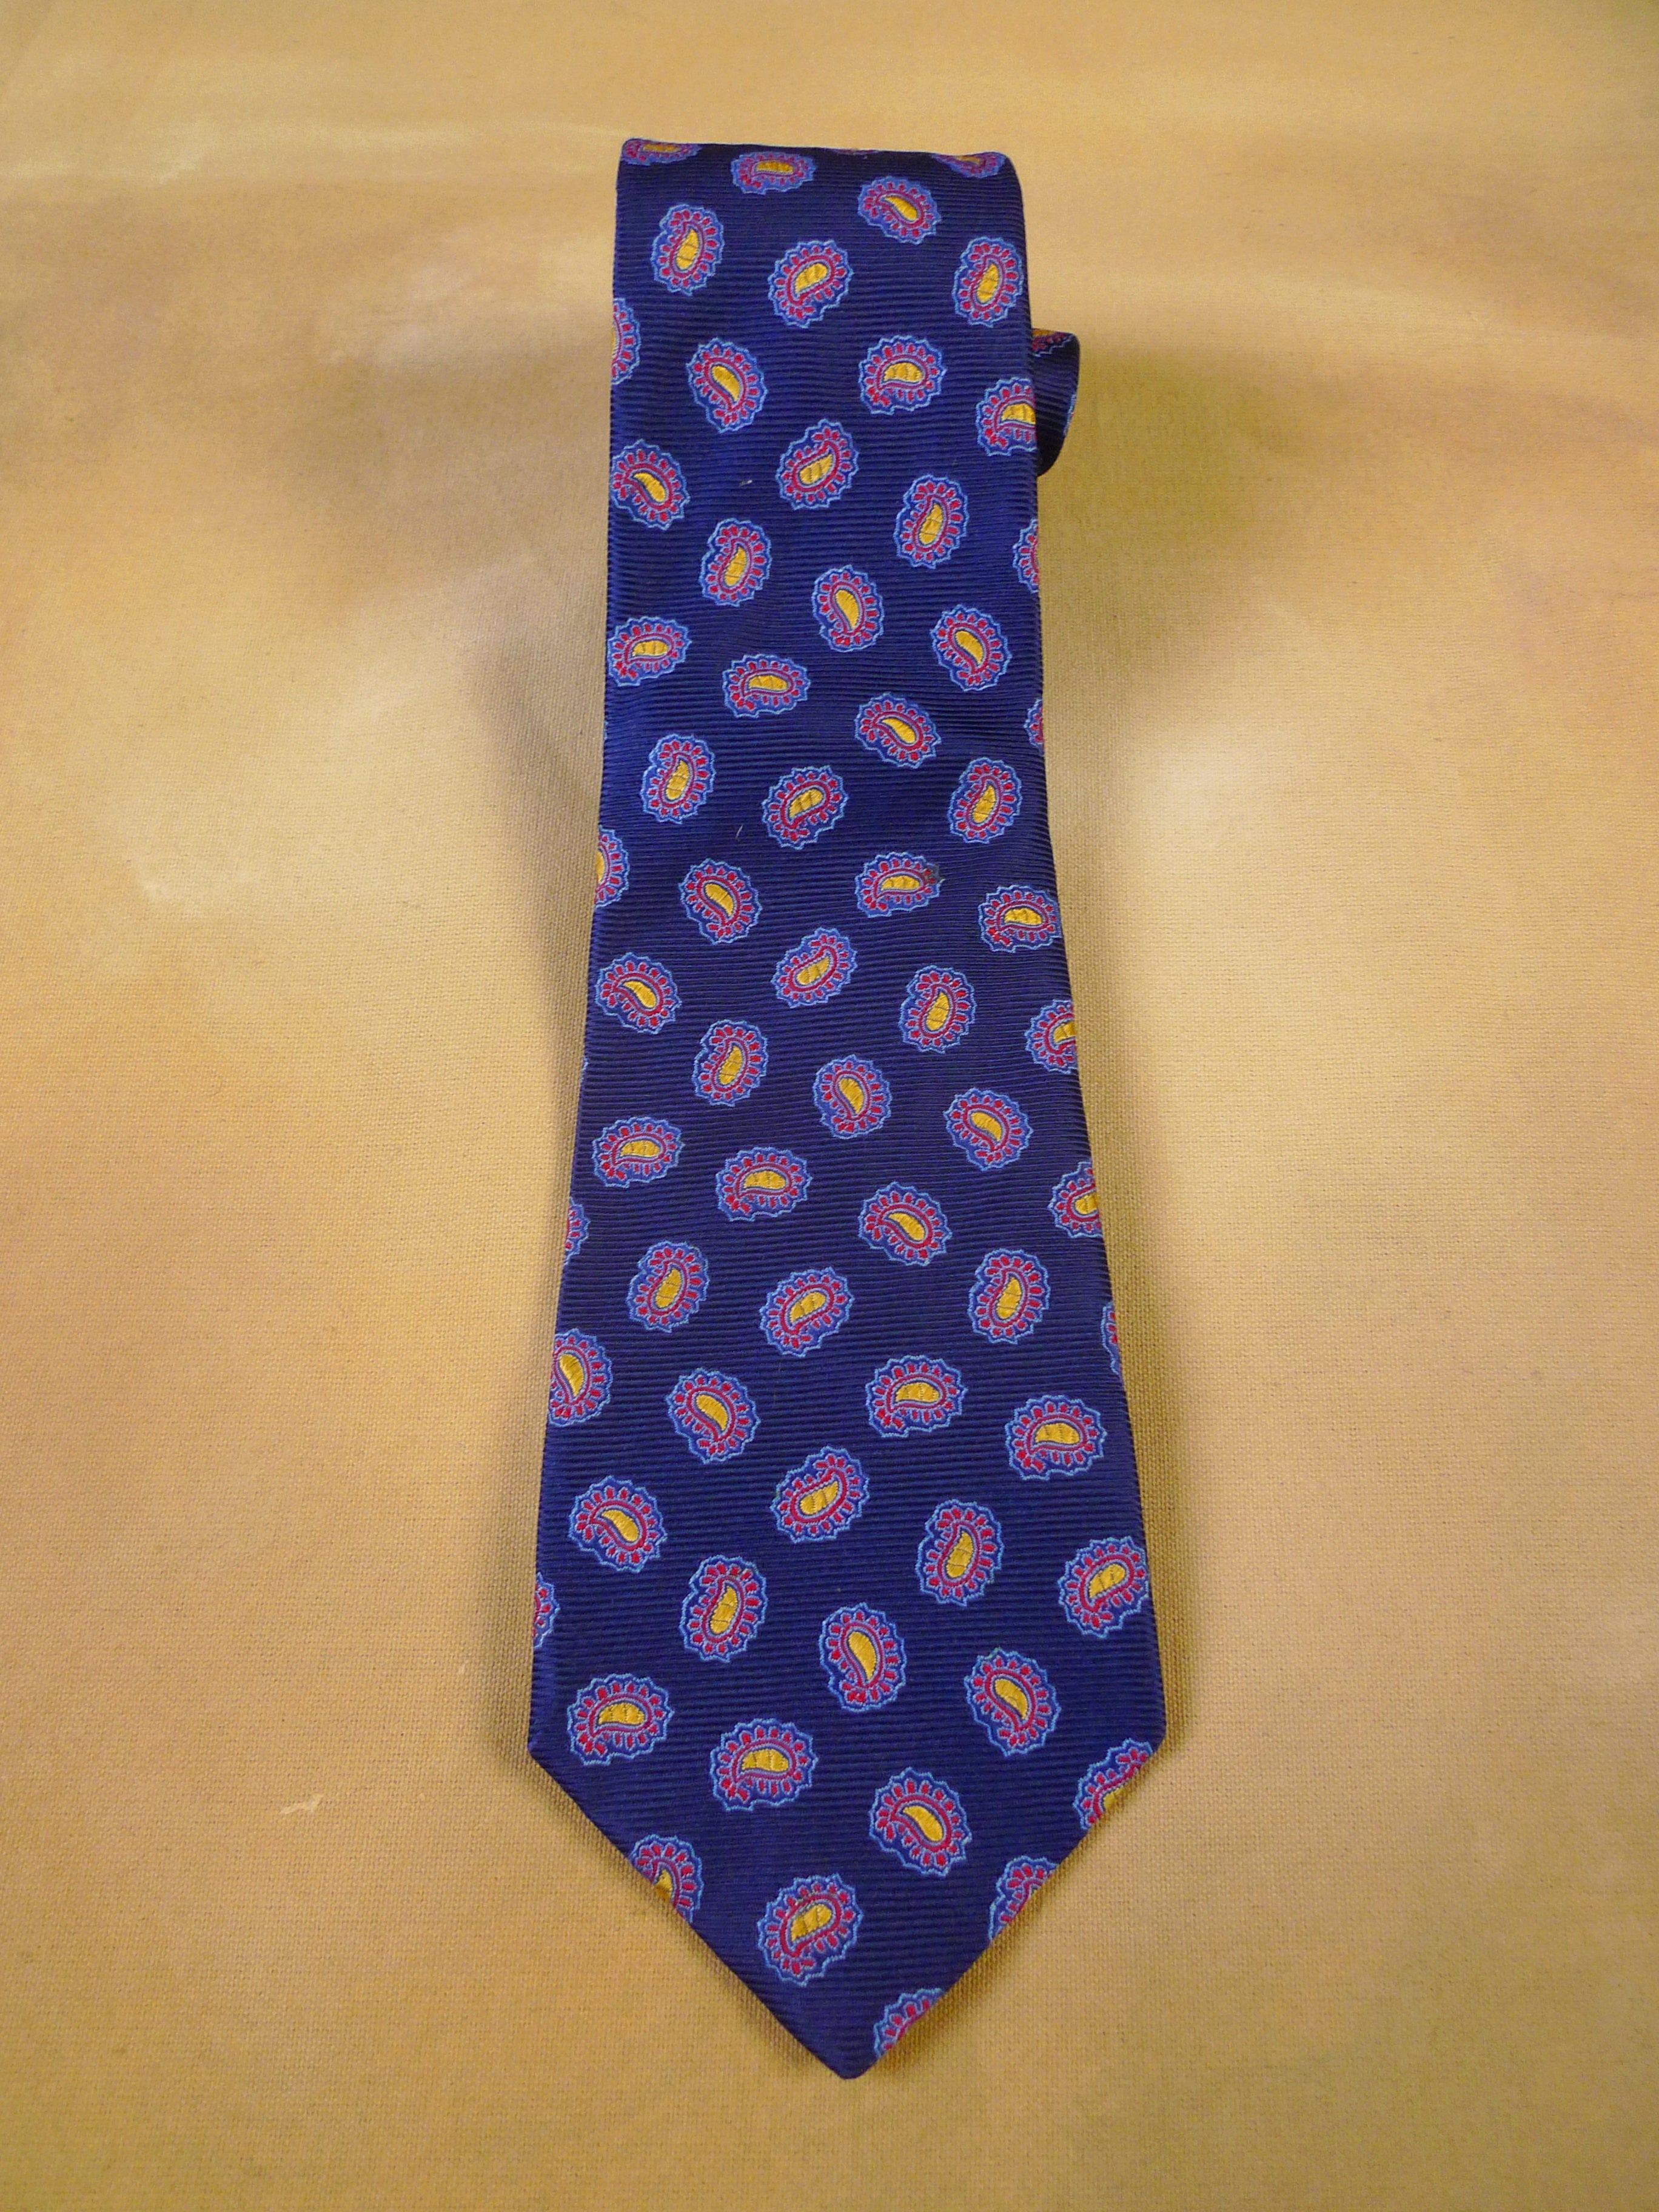 24/0106 immaculate turnbull & asser blue red paisley pattern 100% silk tie